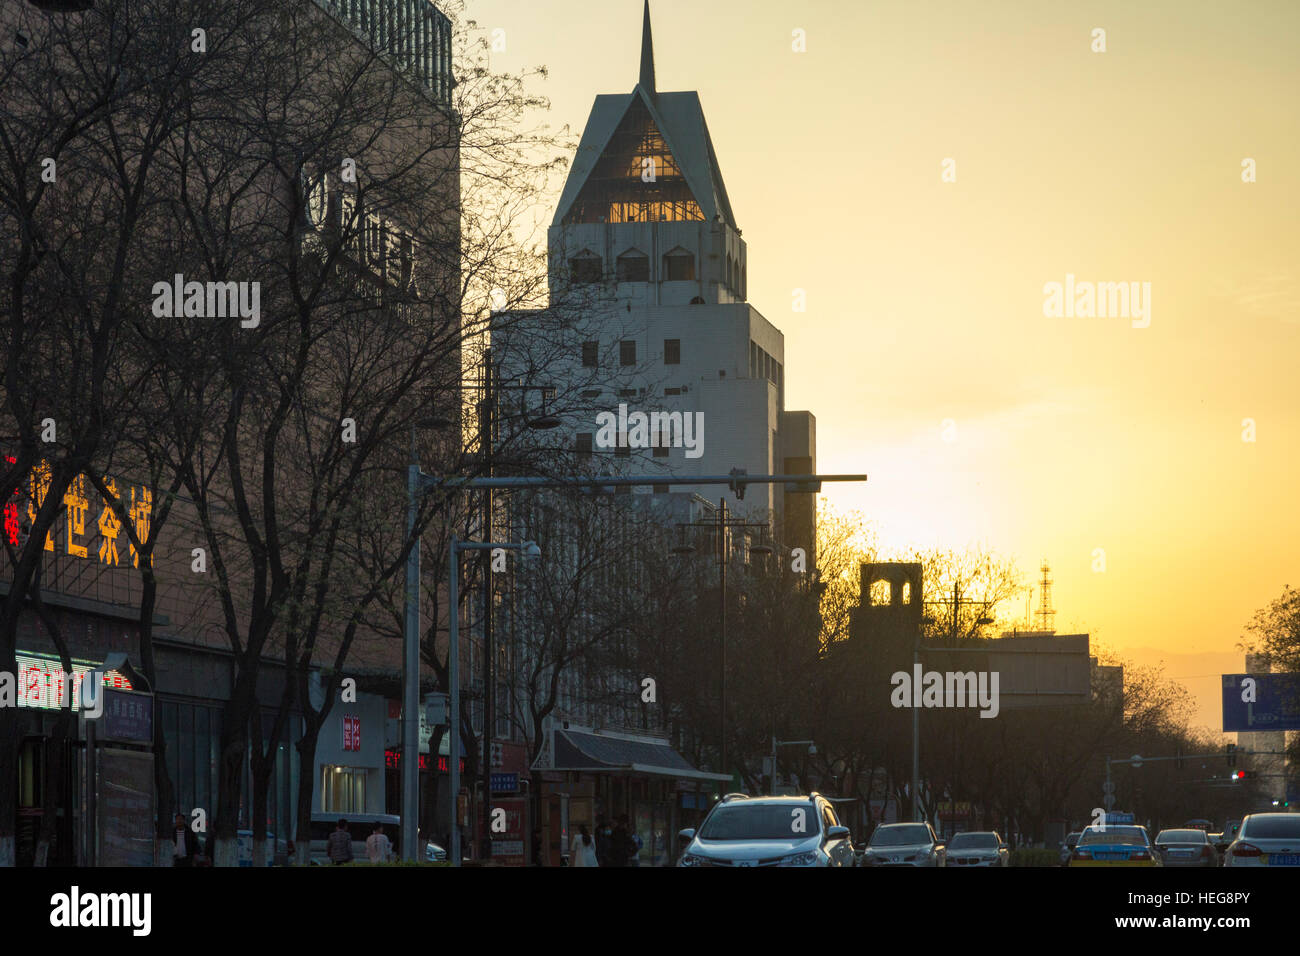 Buildings in Yinchuan city centre at sunset, Ningxia, China Stock Photo